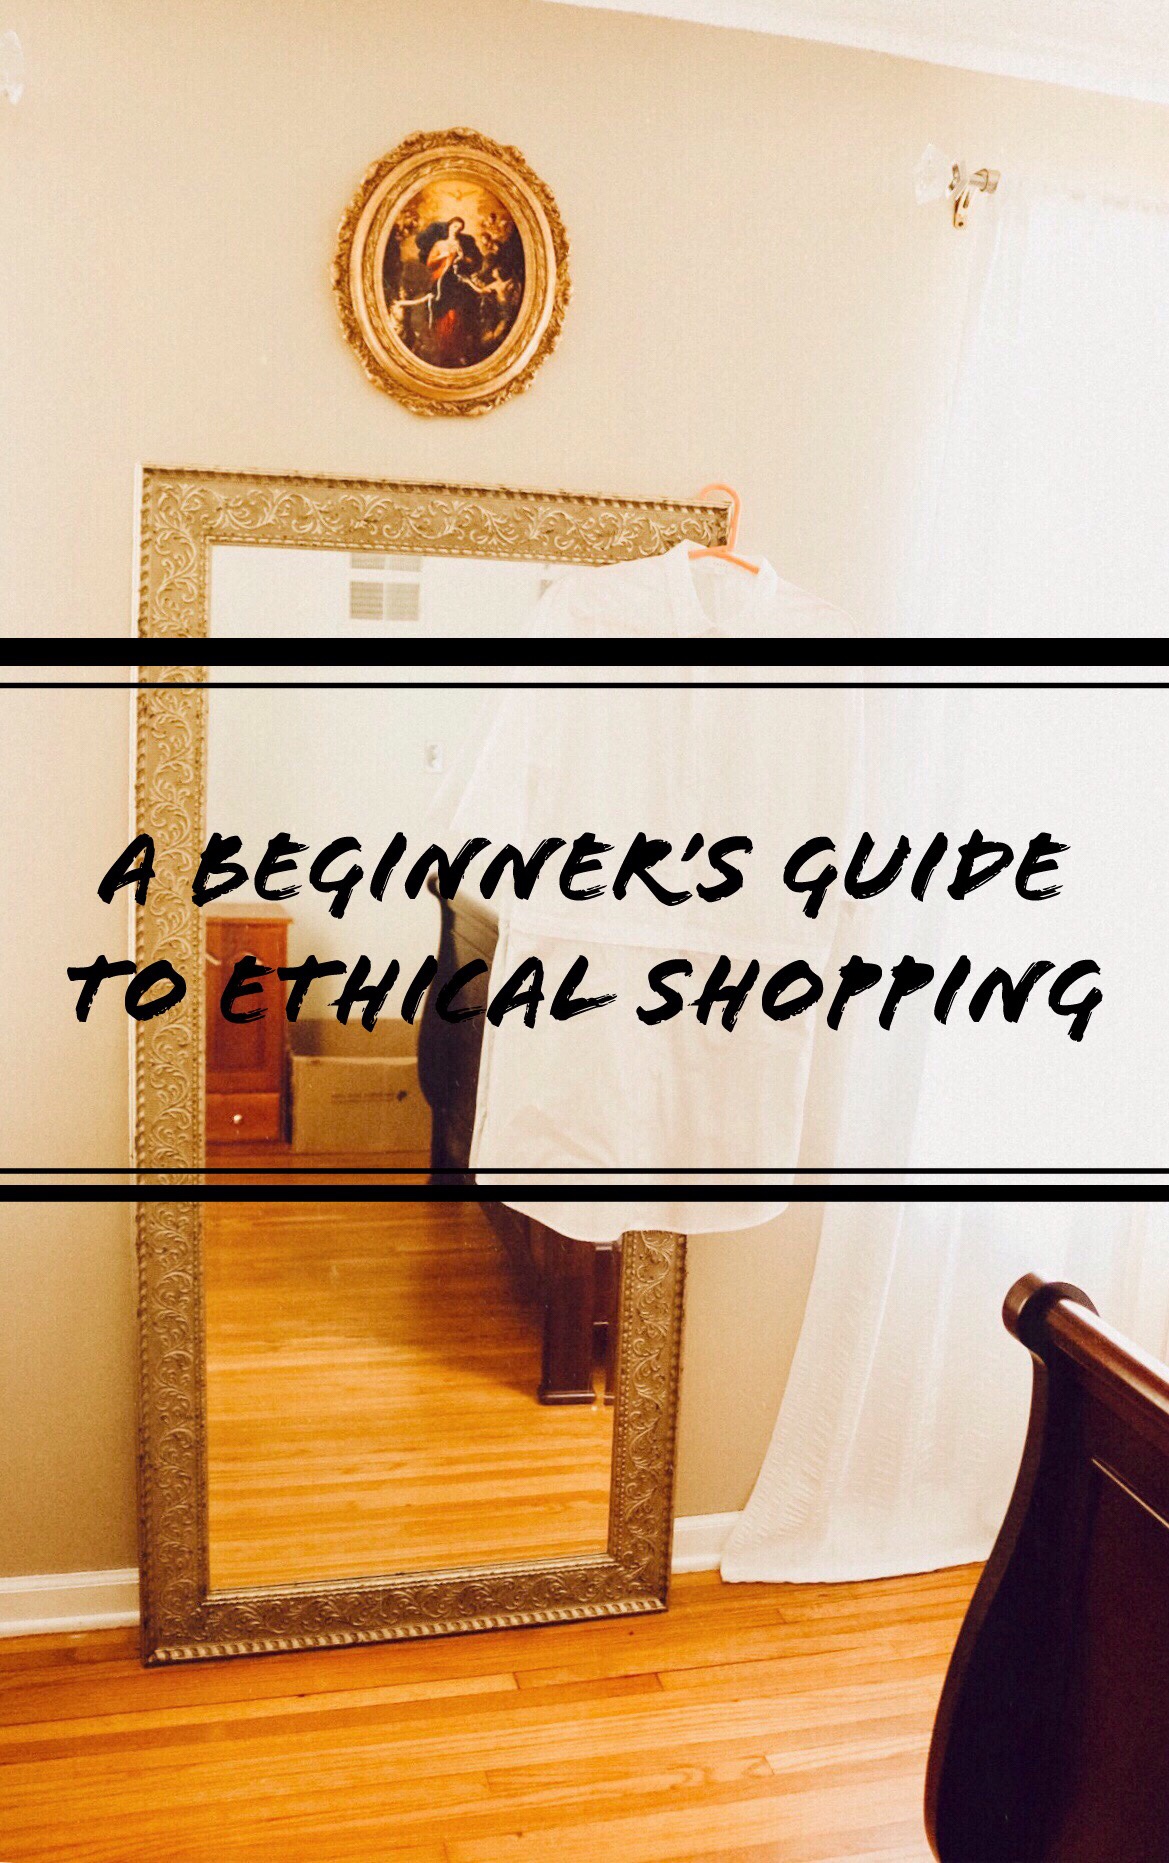 A Beginner's Guide To Ethical Shopping